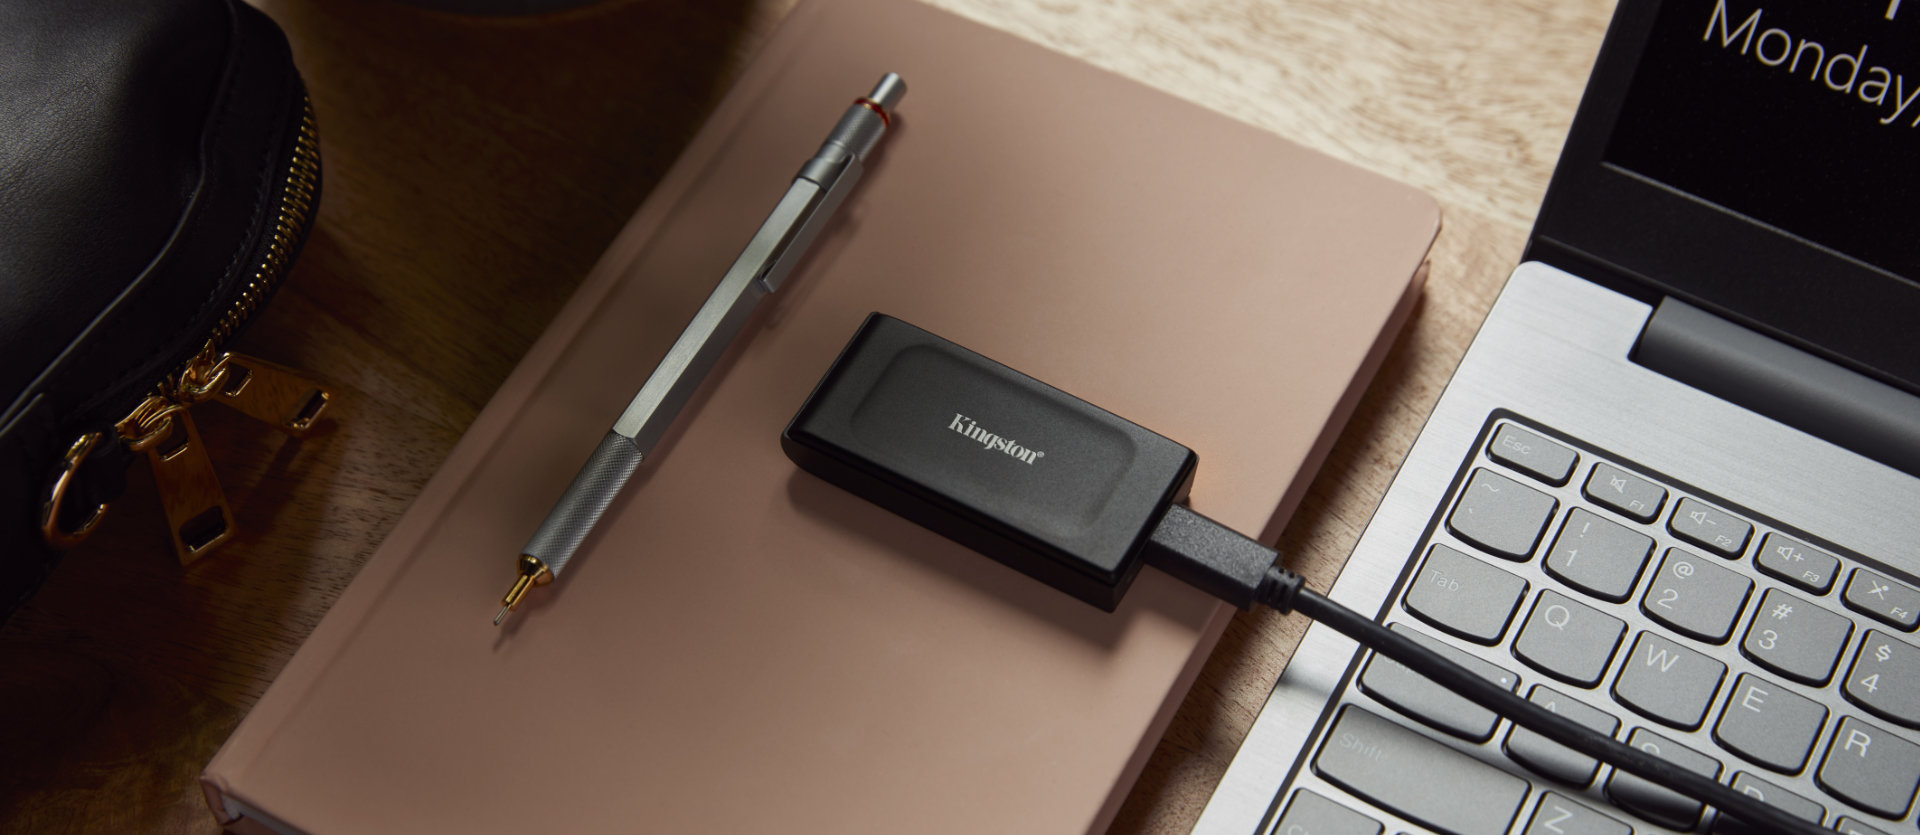 Crucial X10 Pro Portable SSD Review: USB Speed King